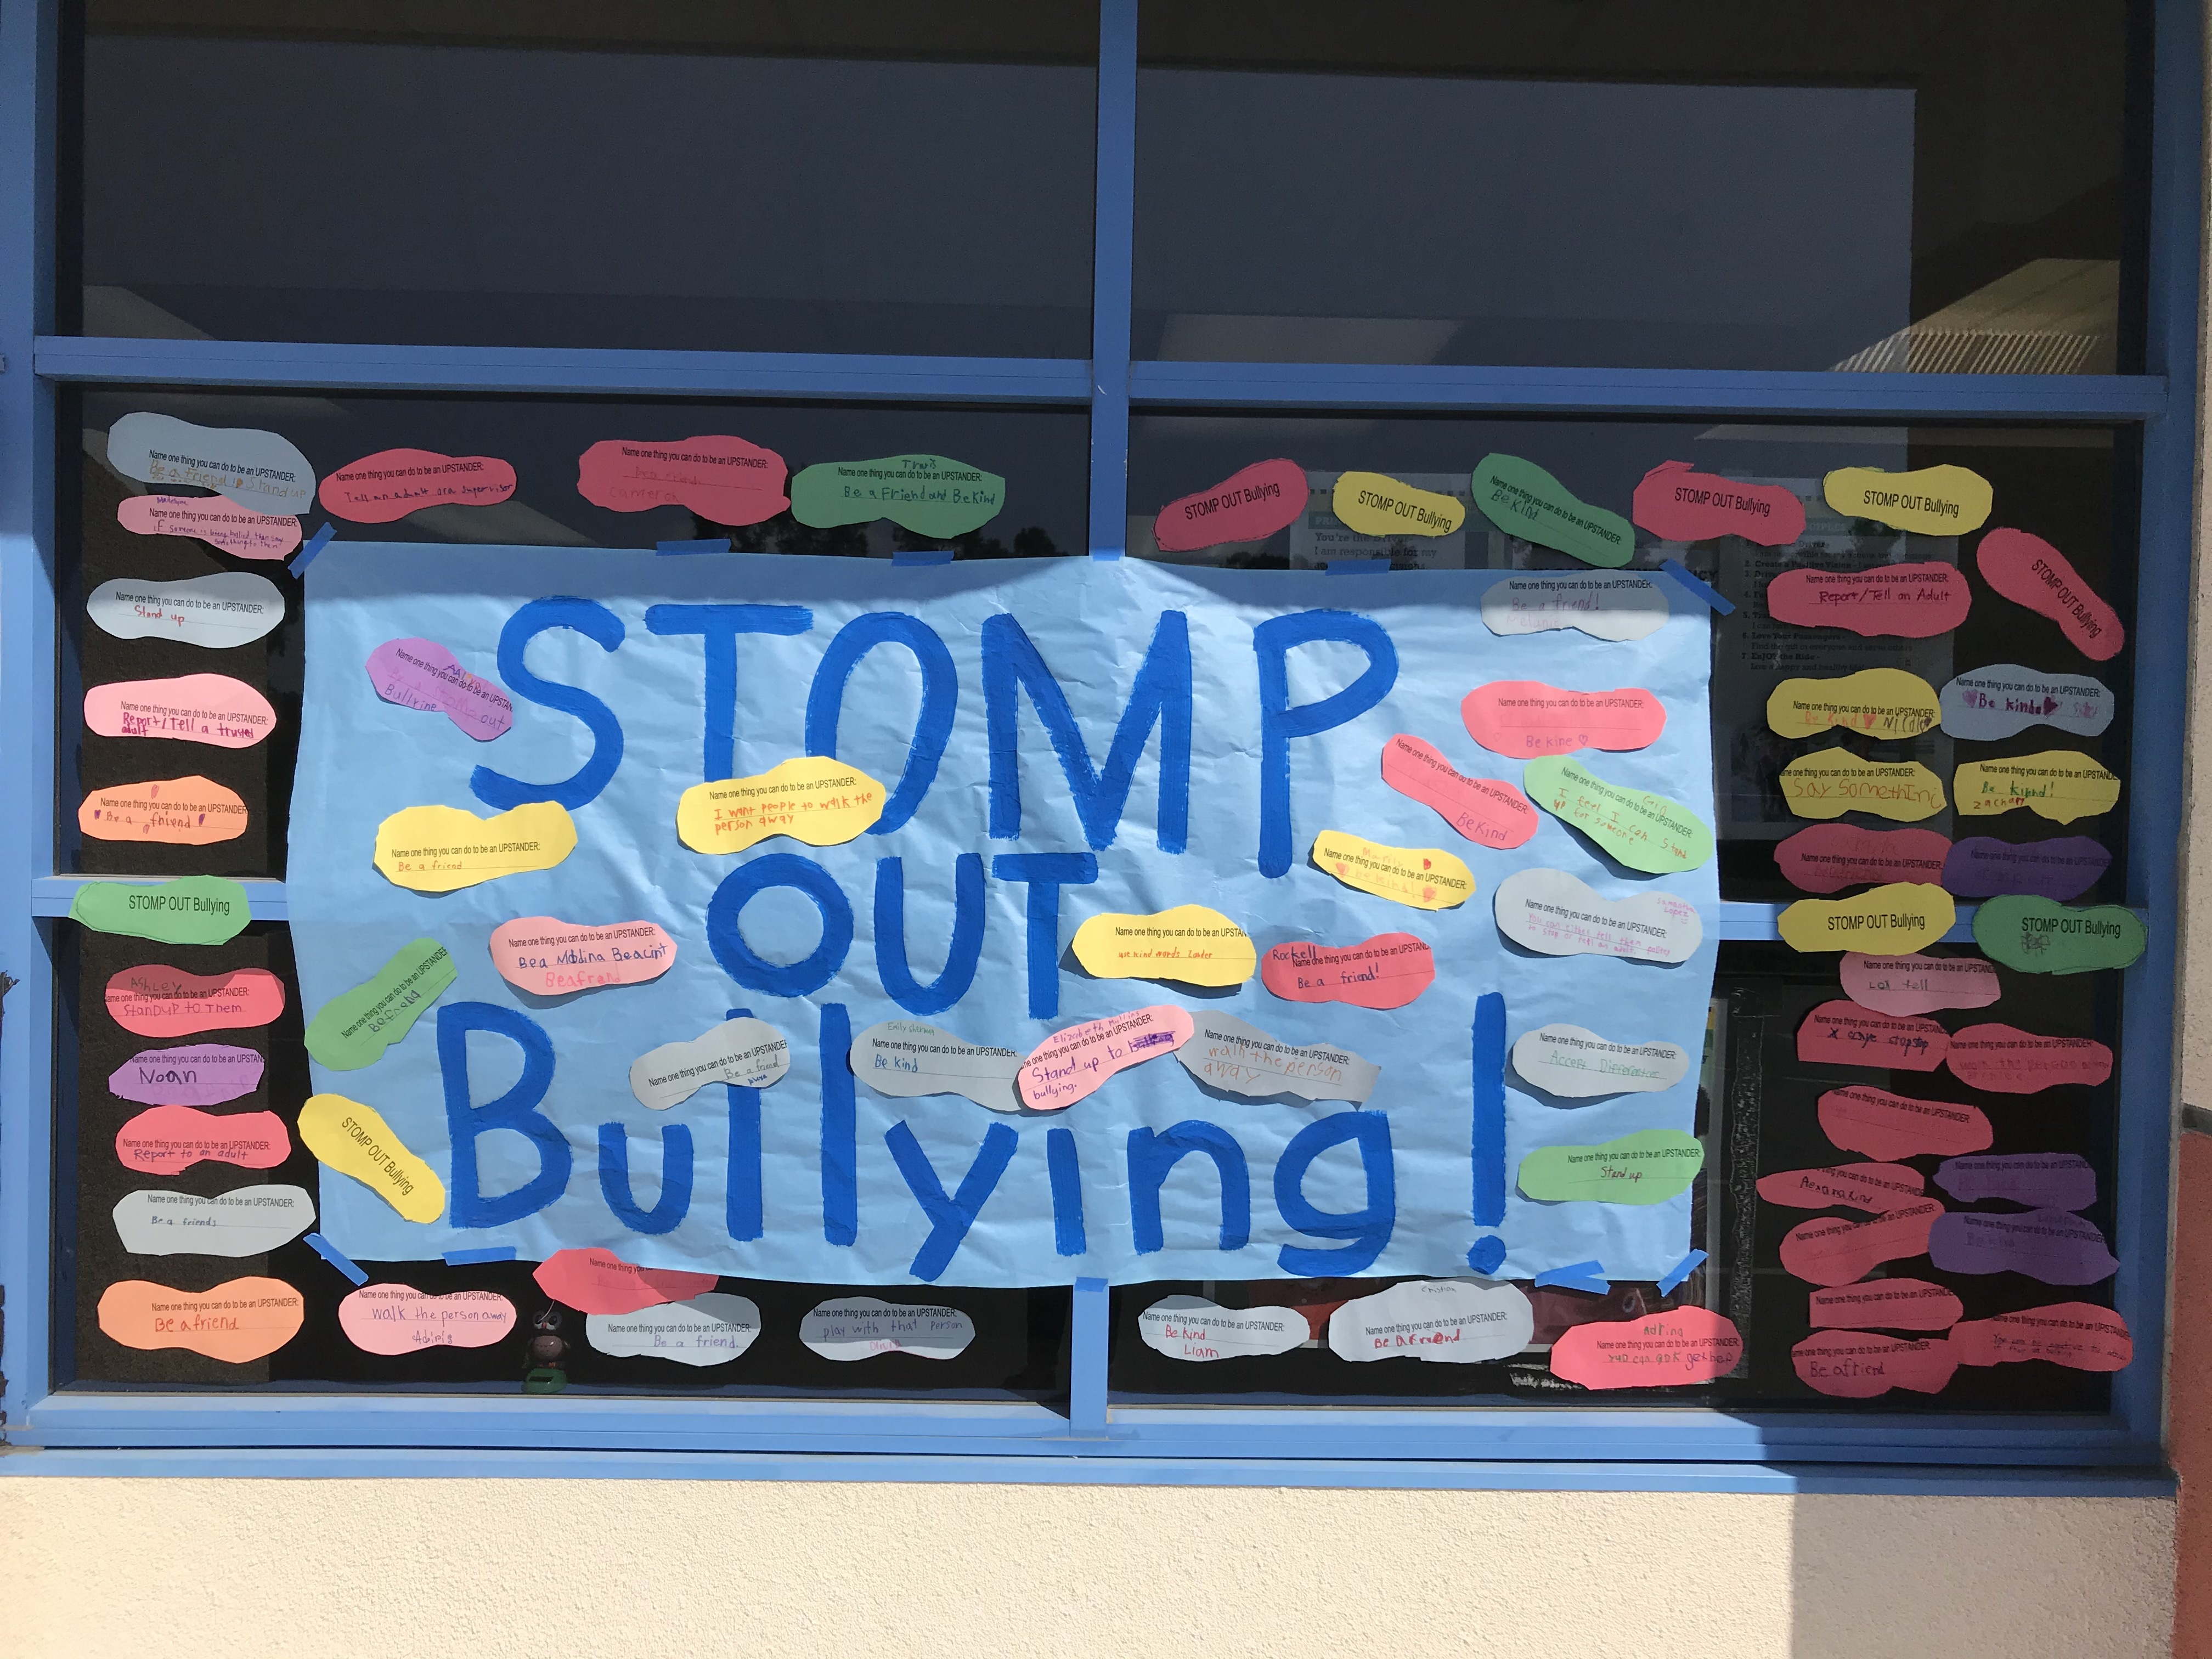 Stomp Out Bullying sign